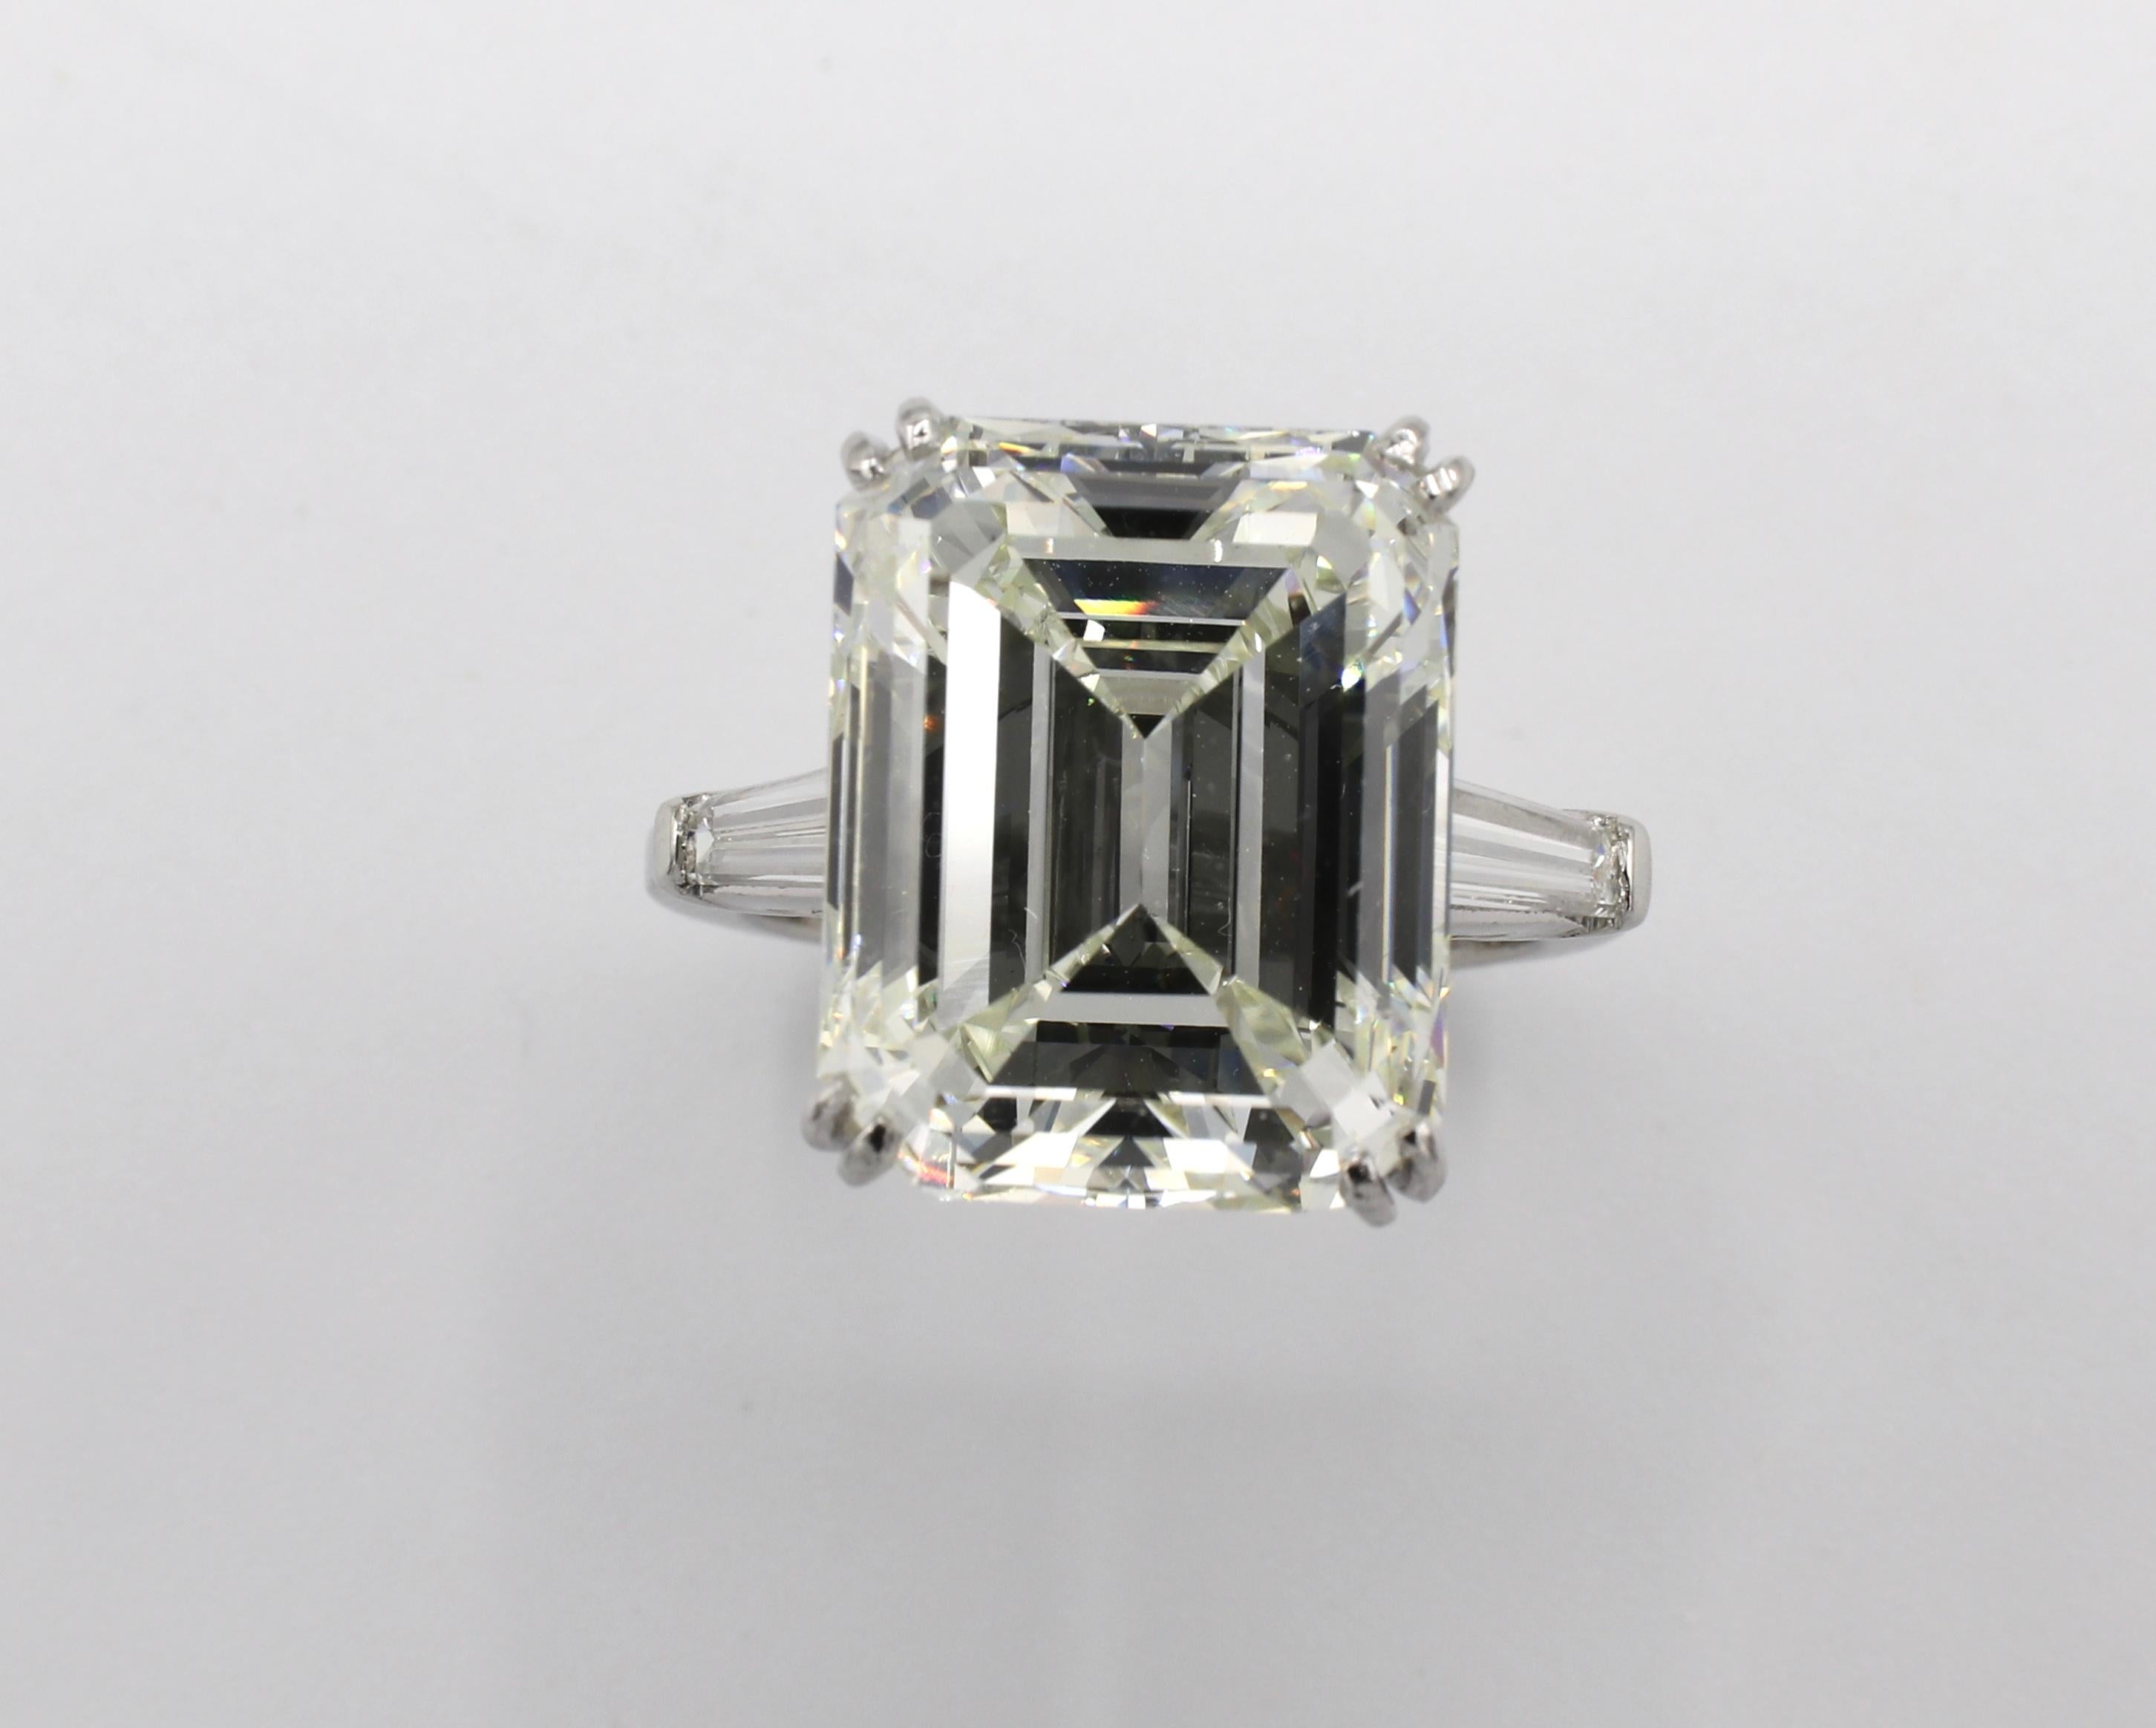 GIA Certified 12.33 Carat Emerald Cut Diamond Engagement Ring Platinum Size 6

GIA Report Number: 5202294707 (please note original report pictured for details)
Shape: Emerald Cut
Carat Weight:  12.33
Color: L
Clarity: VS1

Metal: Platinum, marked